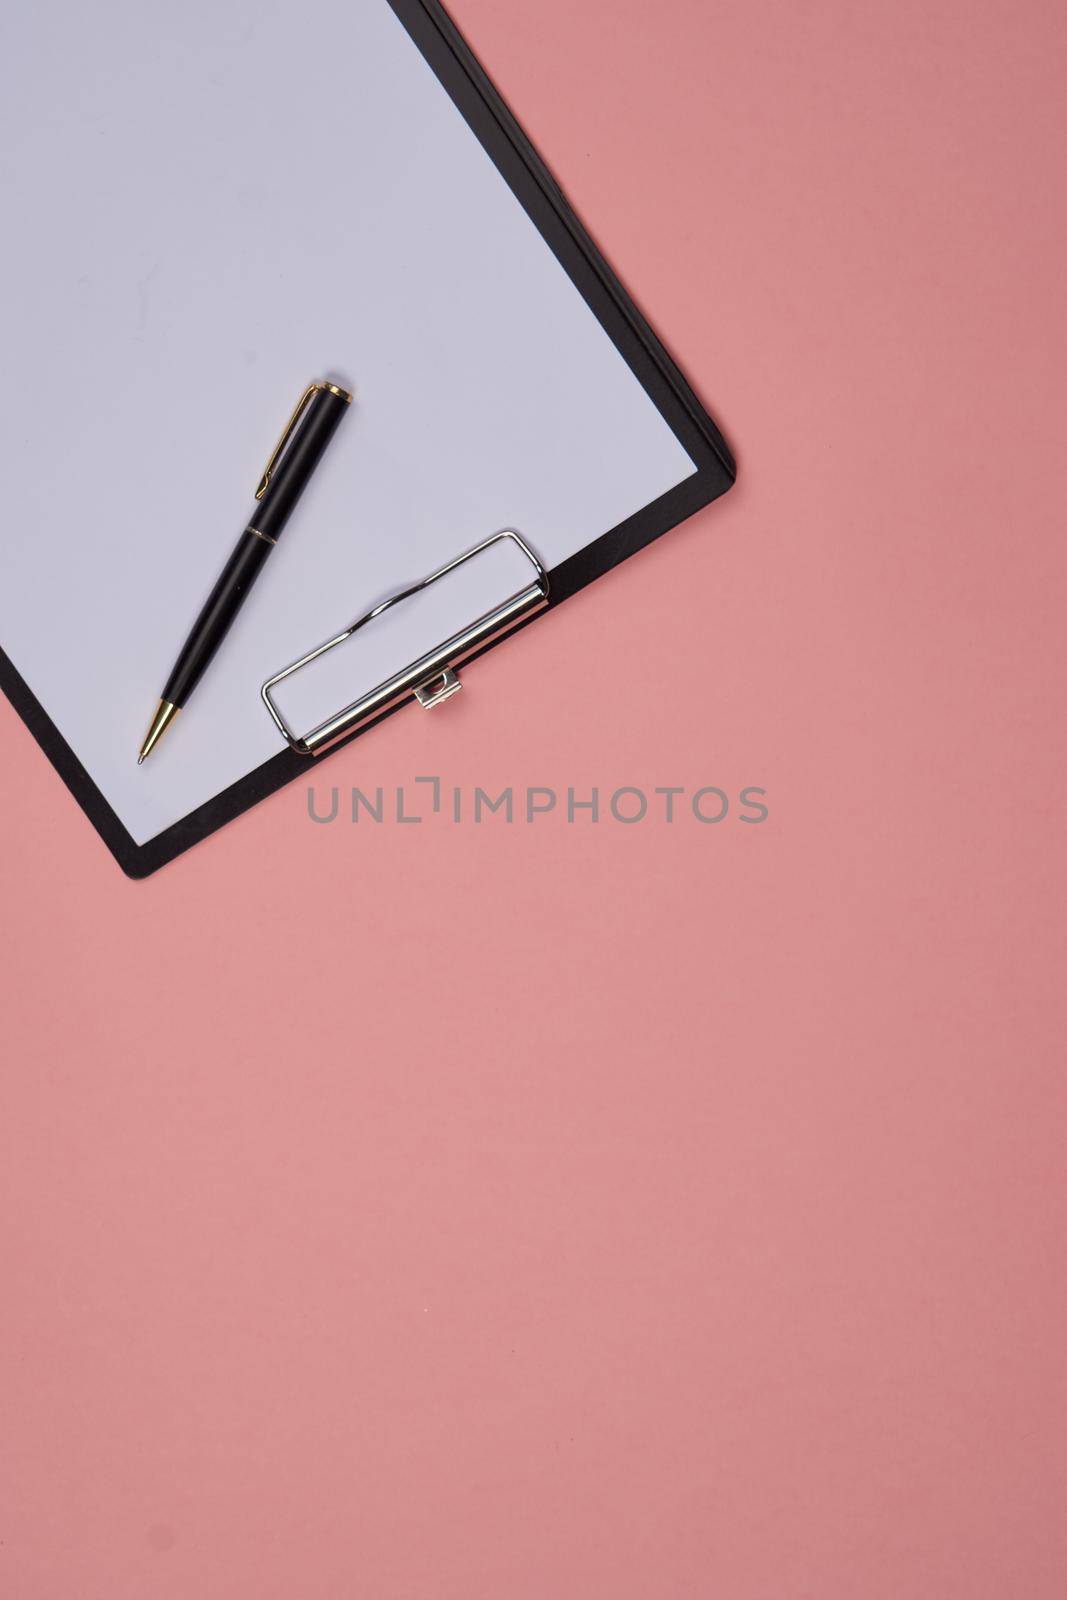 folder for papers office accessories notepad colorful background business tools. High quality photo